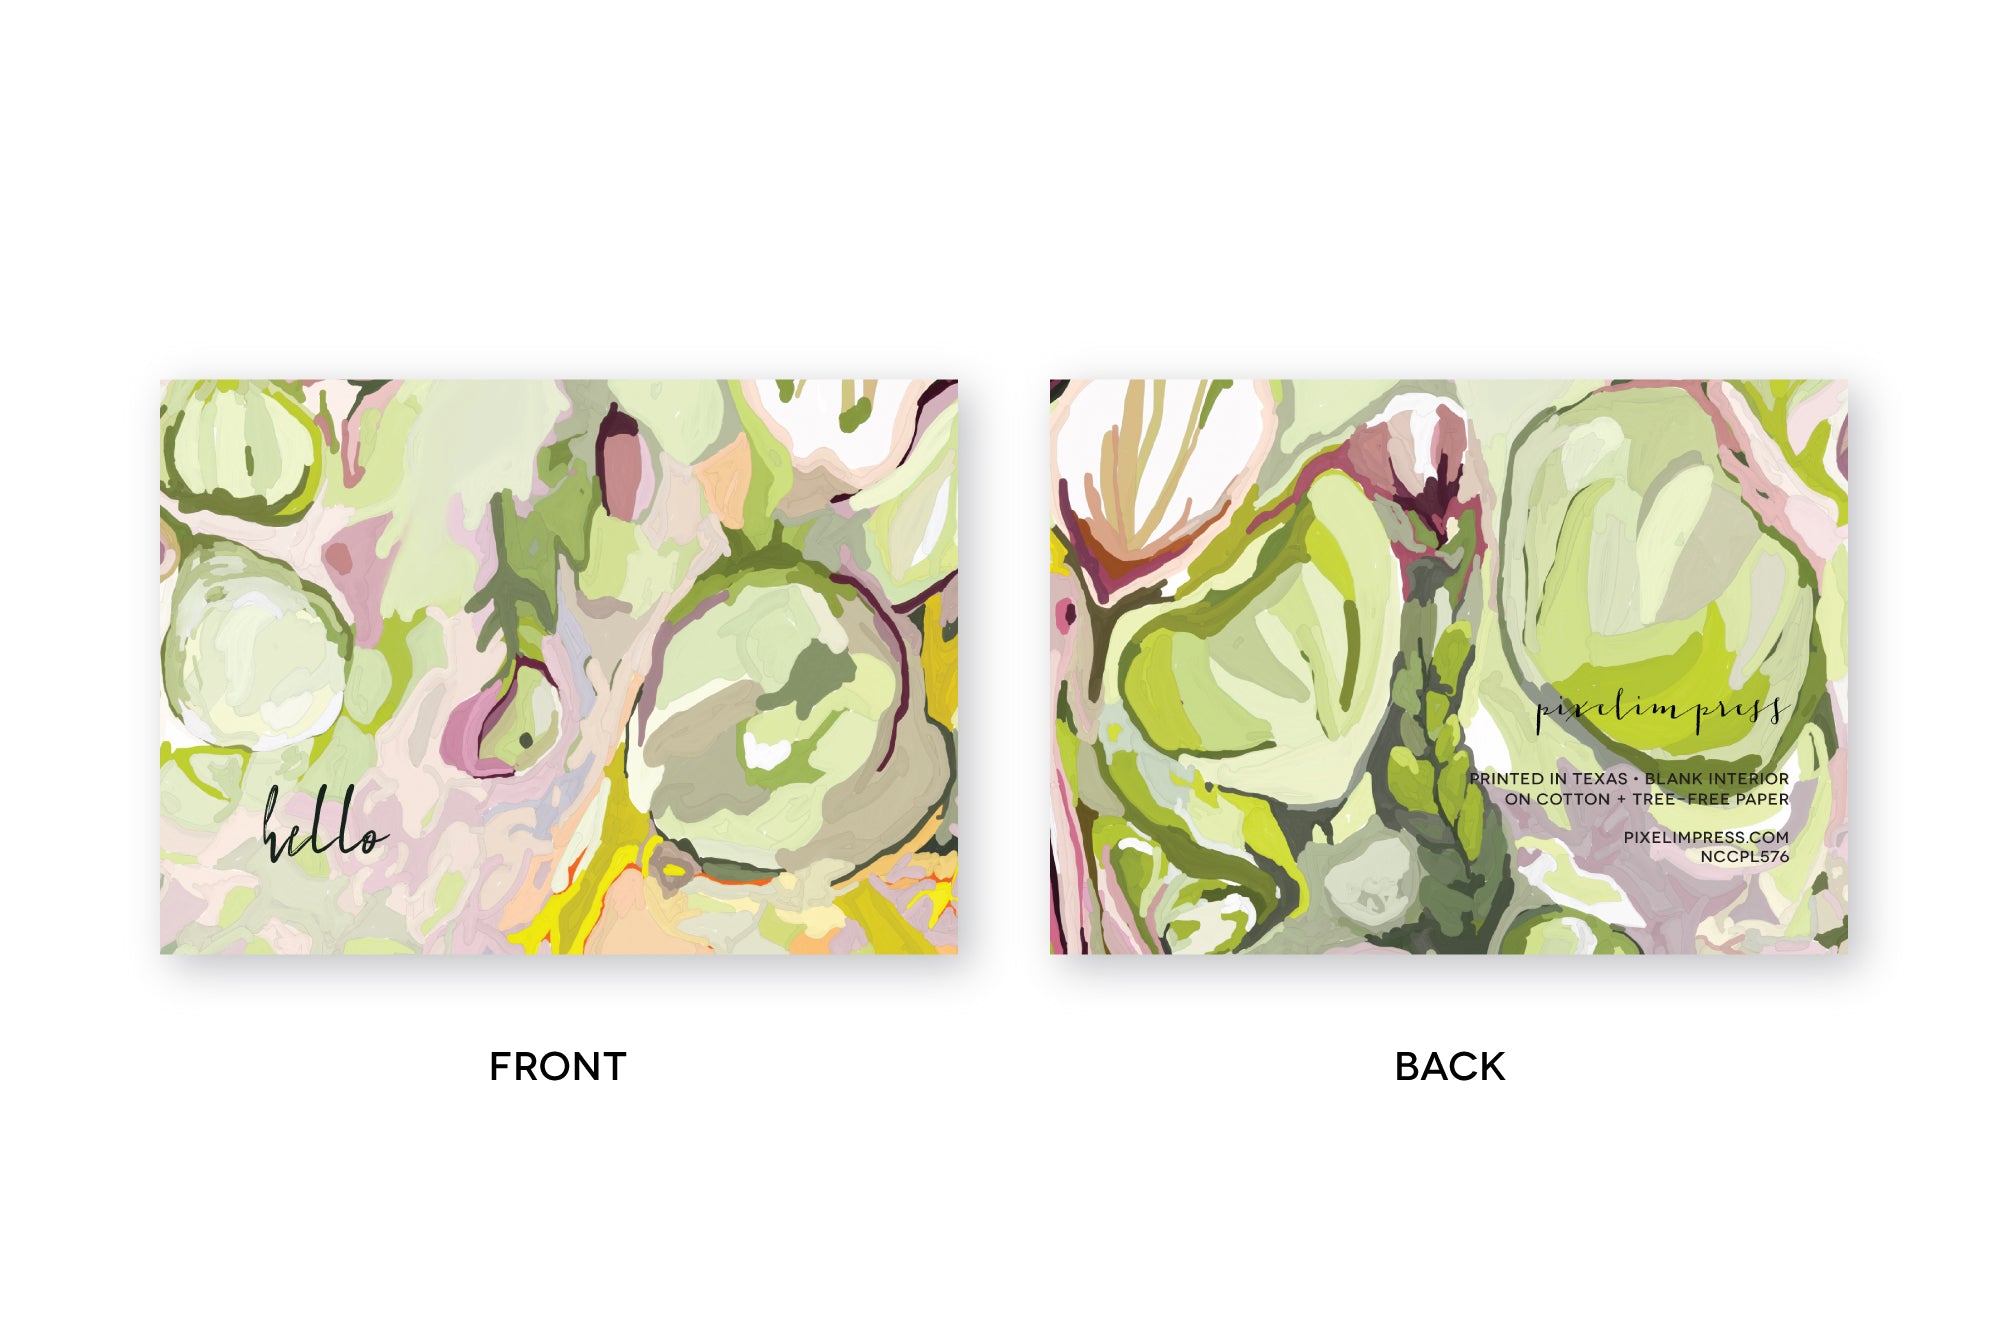 front and back side of HELLO notecard featuring abstract floral art